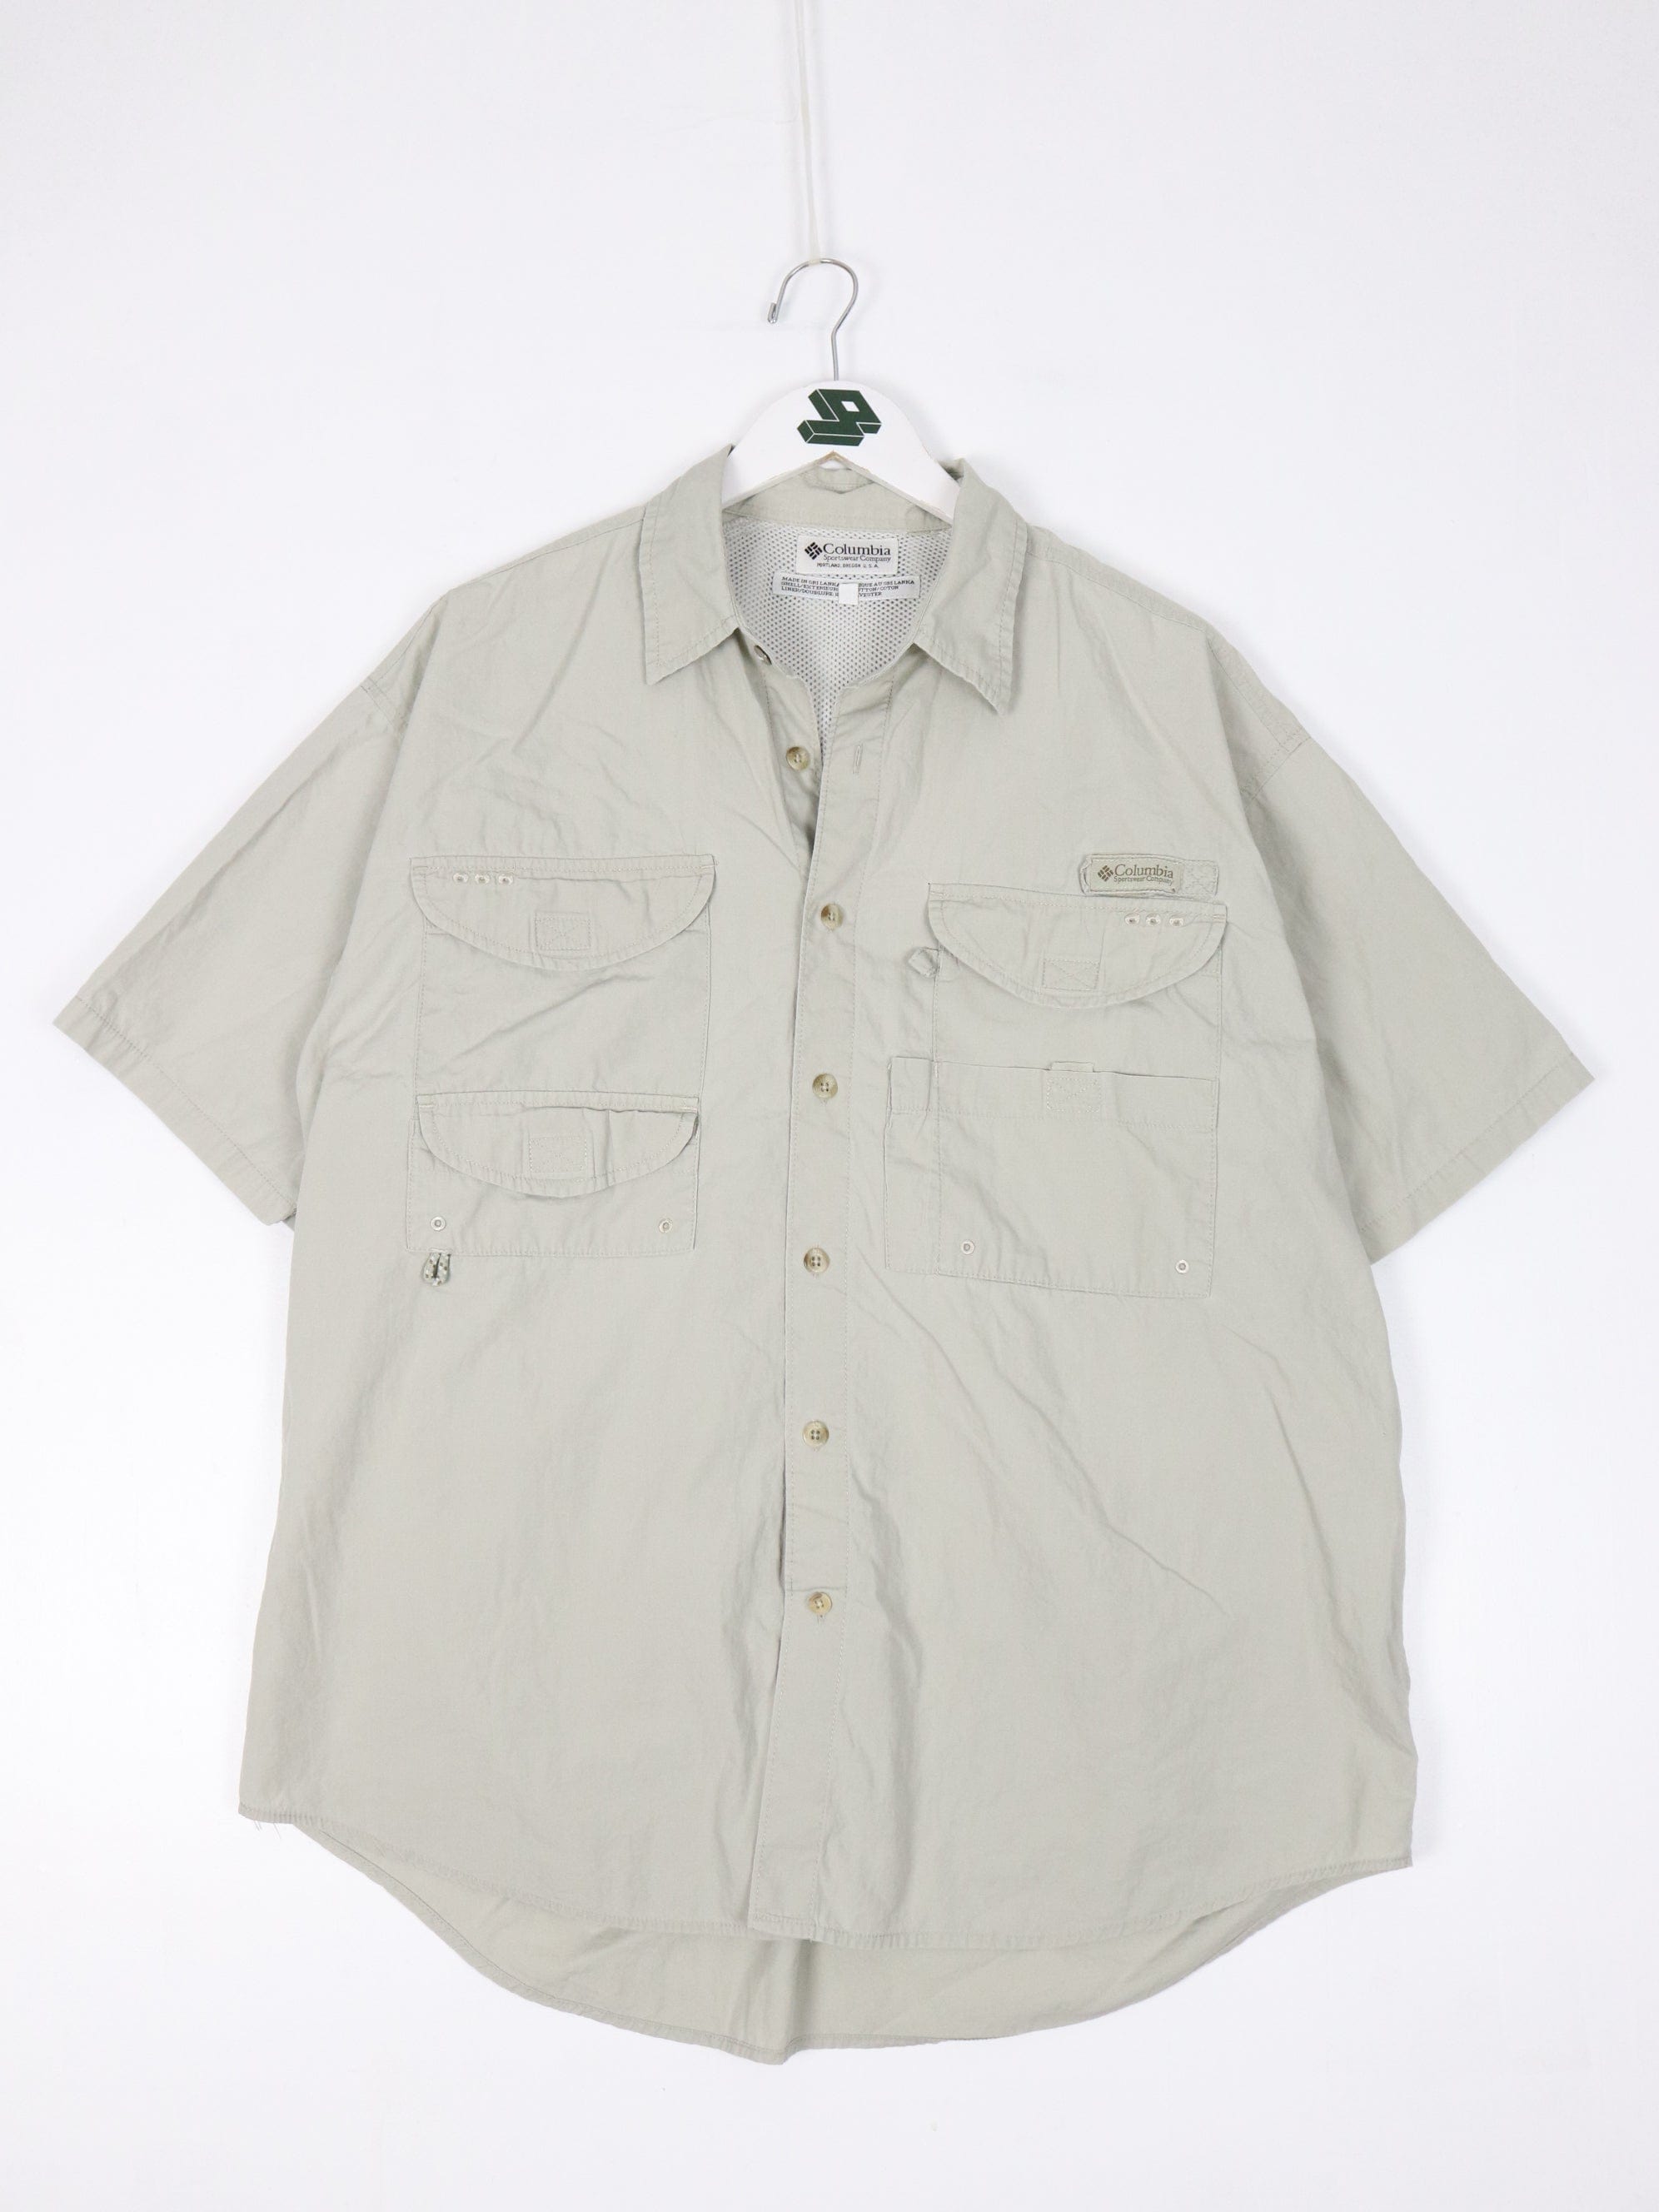 Vintage Columbia Shirt Fits Mens Large Brown Fishing PFG Outdoors Button Up